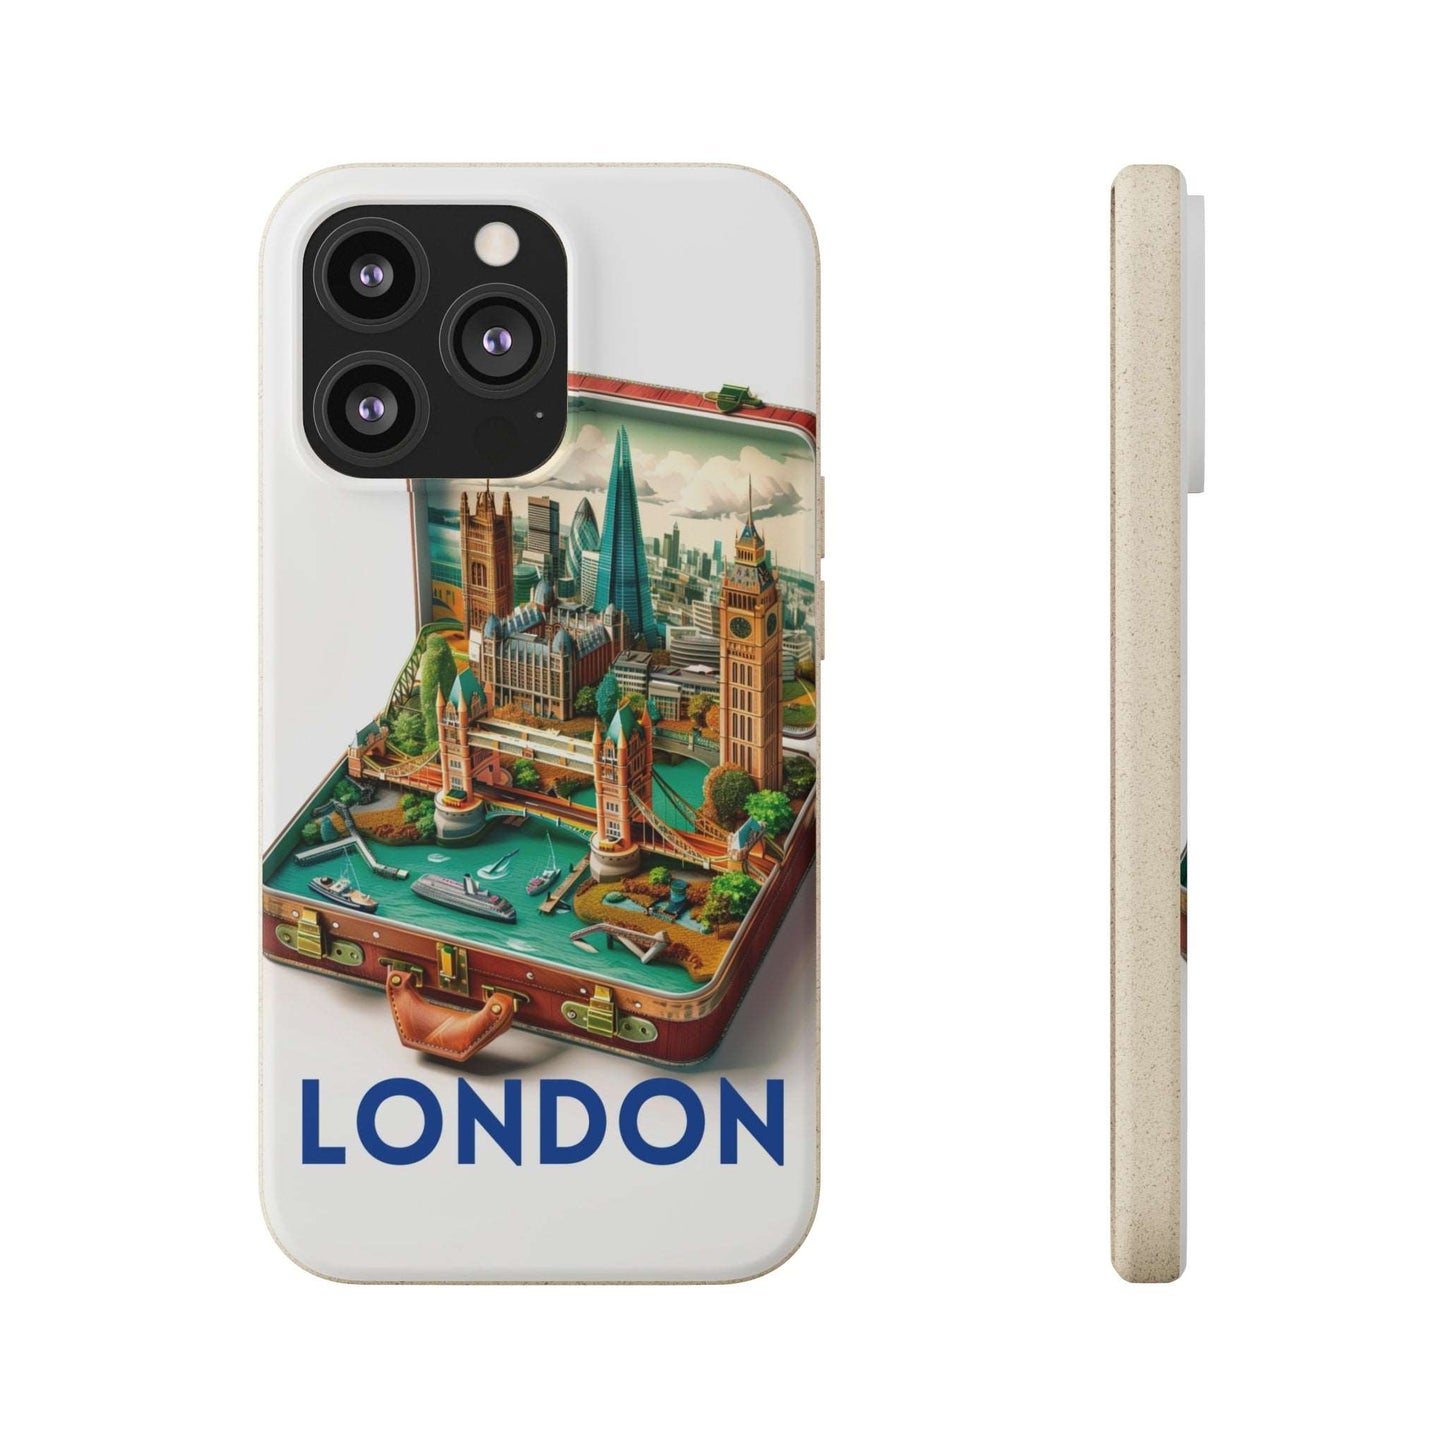 London phone case made from sustainable plant-based materials and bamboo fibers. Biodegradable and wireless charging compatible